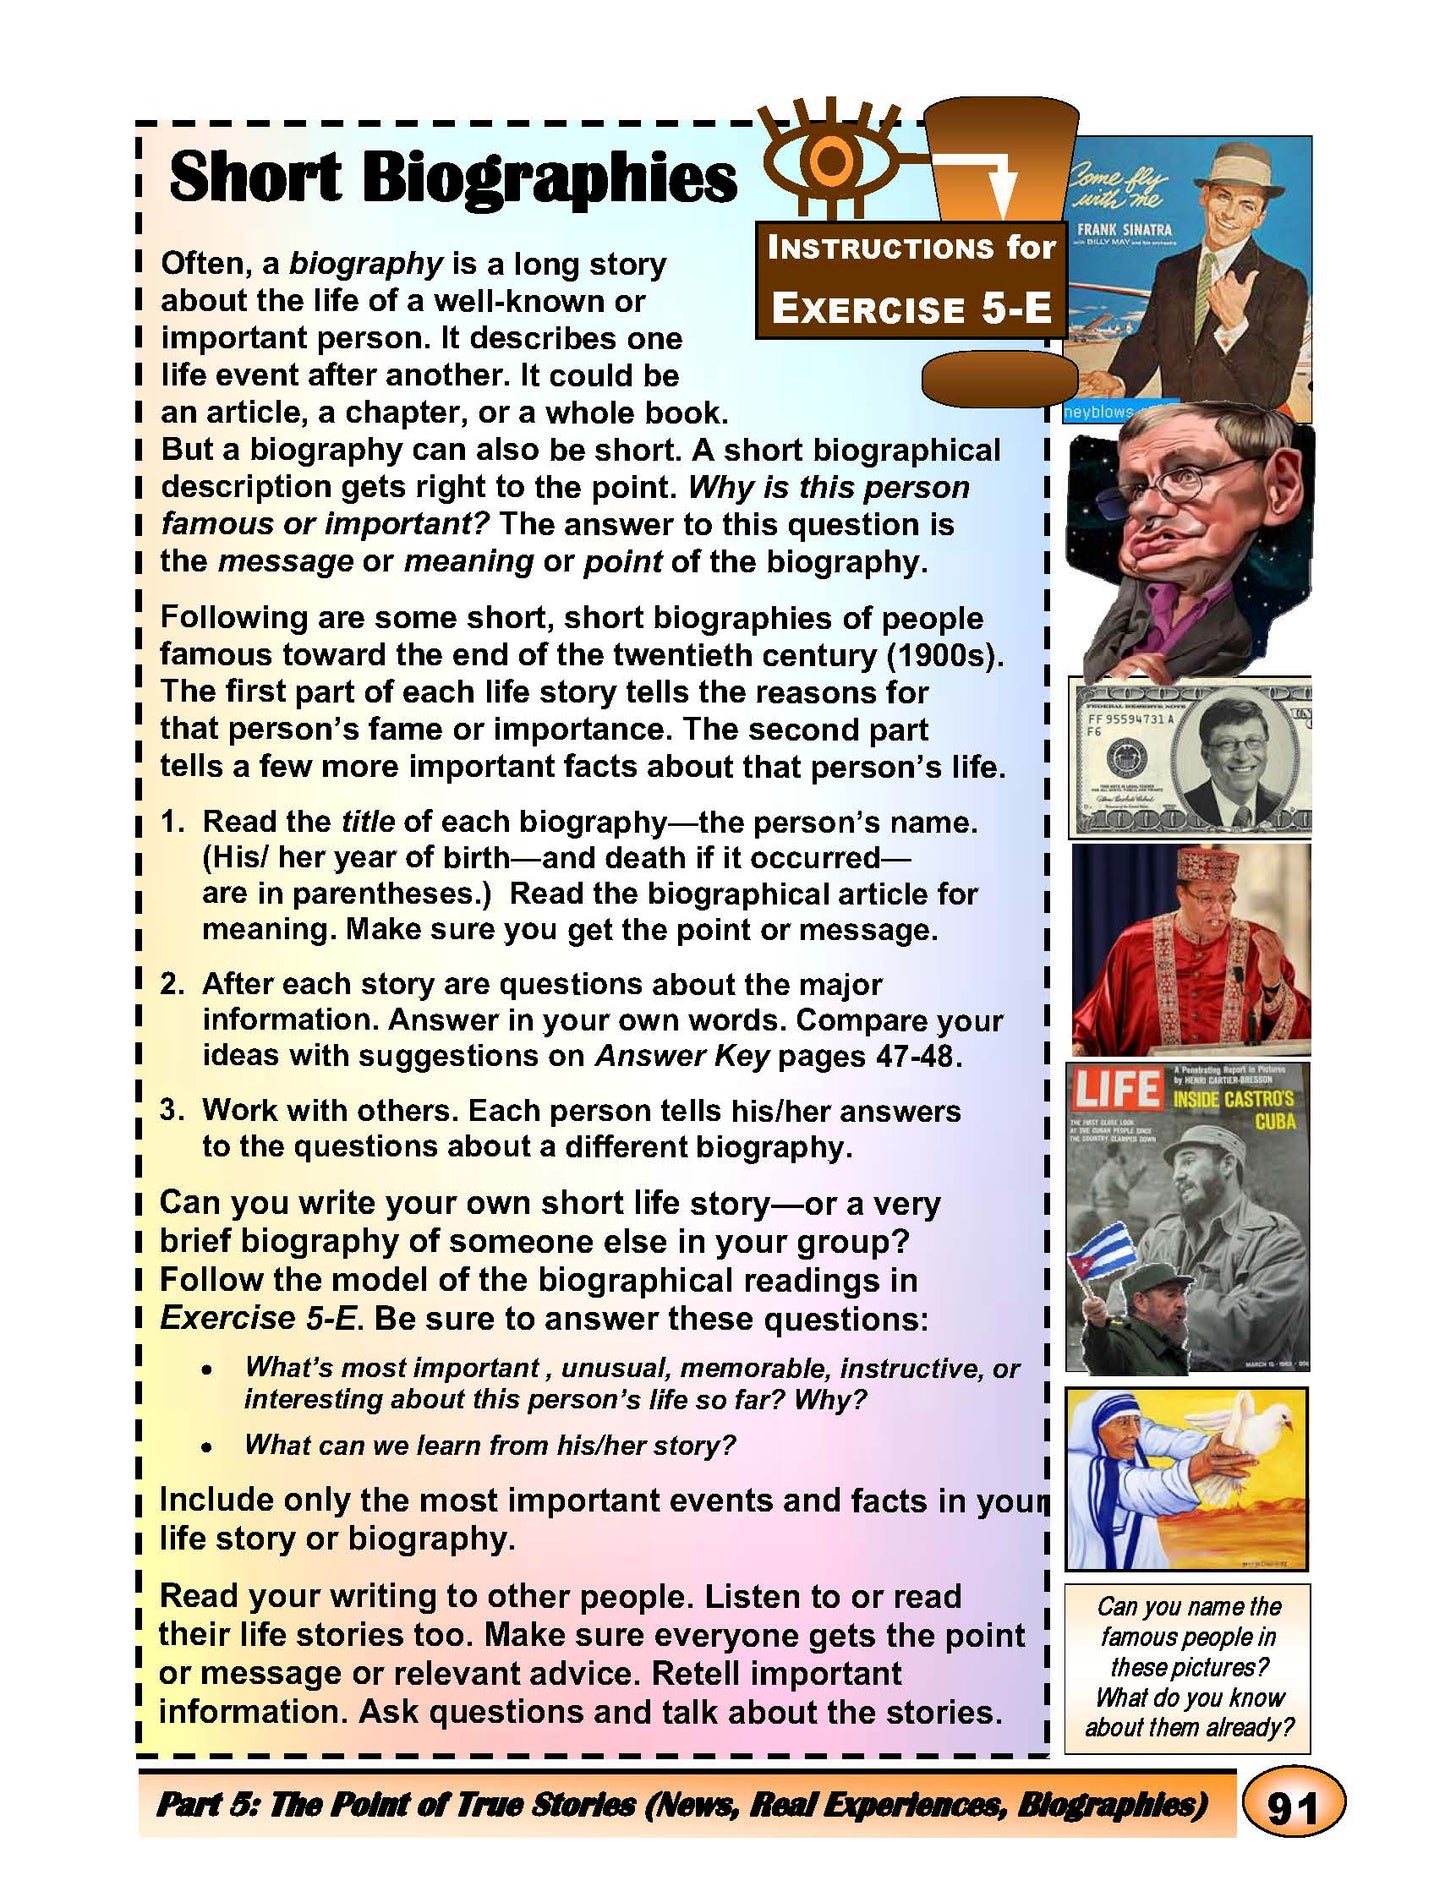 F-07.09 Read & Evaluate Factual (True) Information in the News, People’s Real Experiences, & Biographical Stories